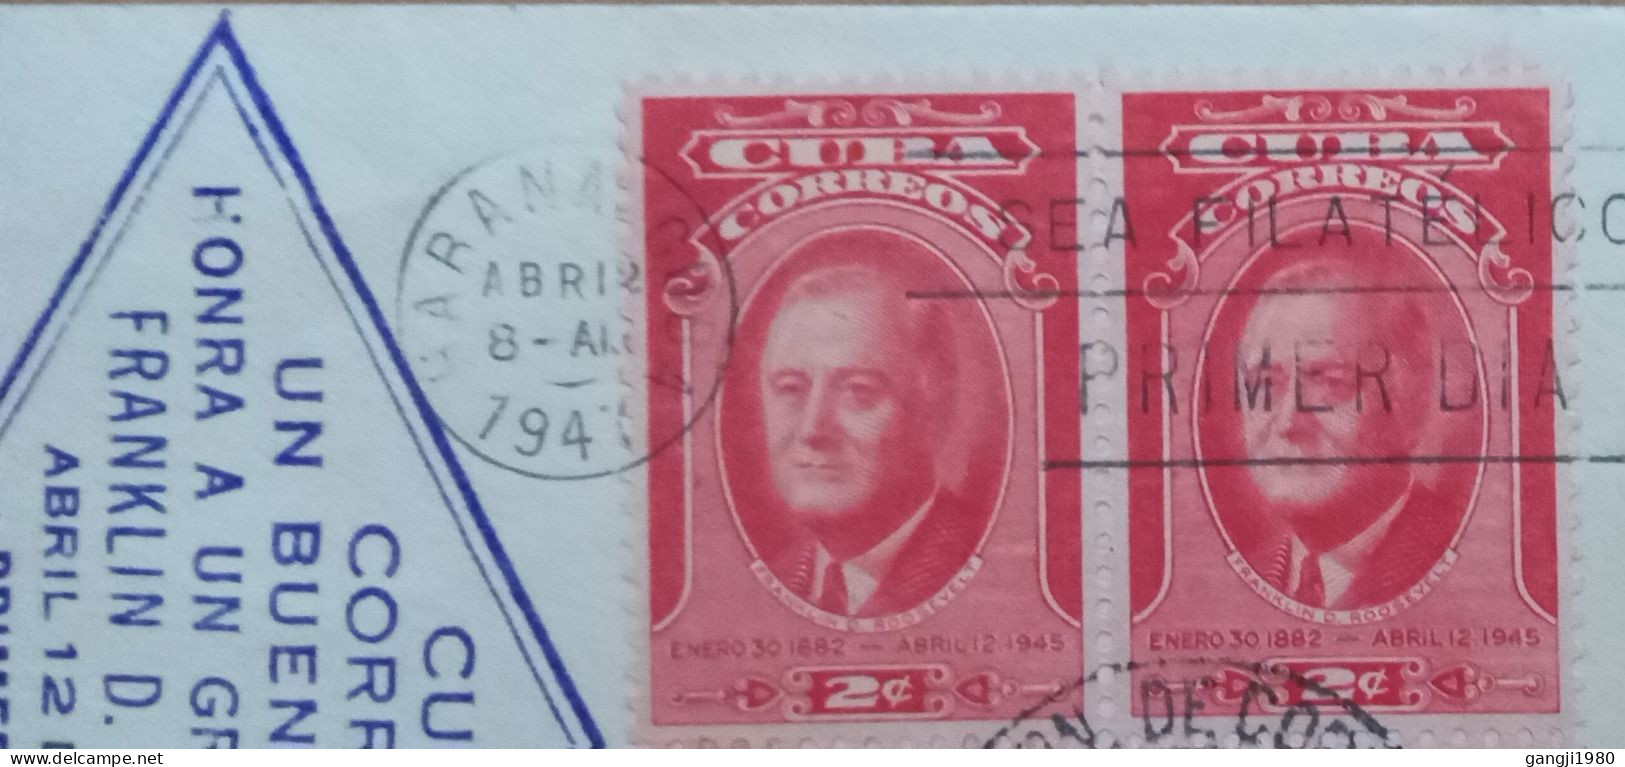 CUBA-USA 1947, FDC COVER, FRANKLIN D.ROOSEVELT, ILLUSTRATE, BLOCK OF 4 STAMP, HABANA CITY 2 DIFF CANCEL, DIAMOND SHAPE - Covers & Documents